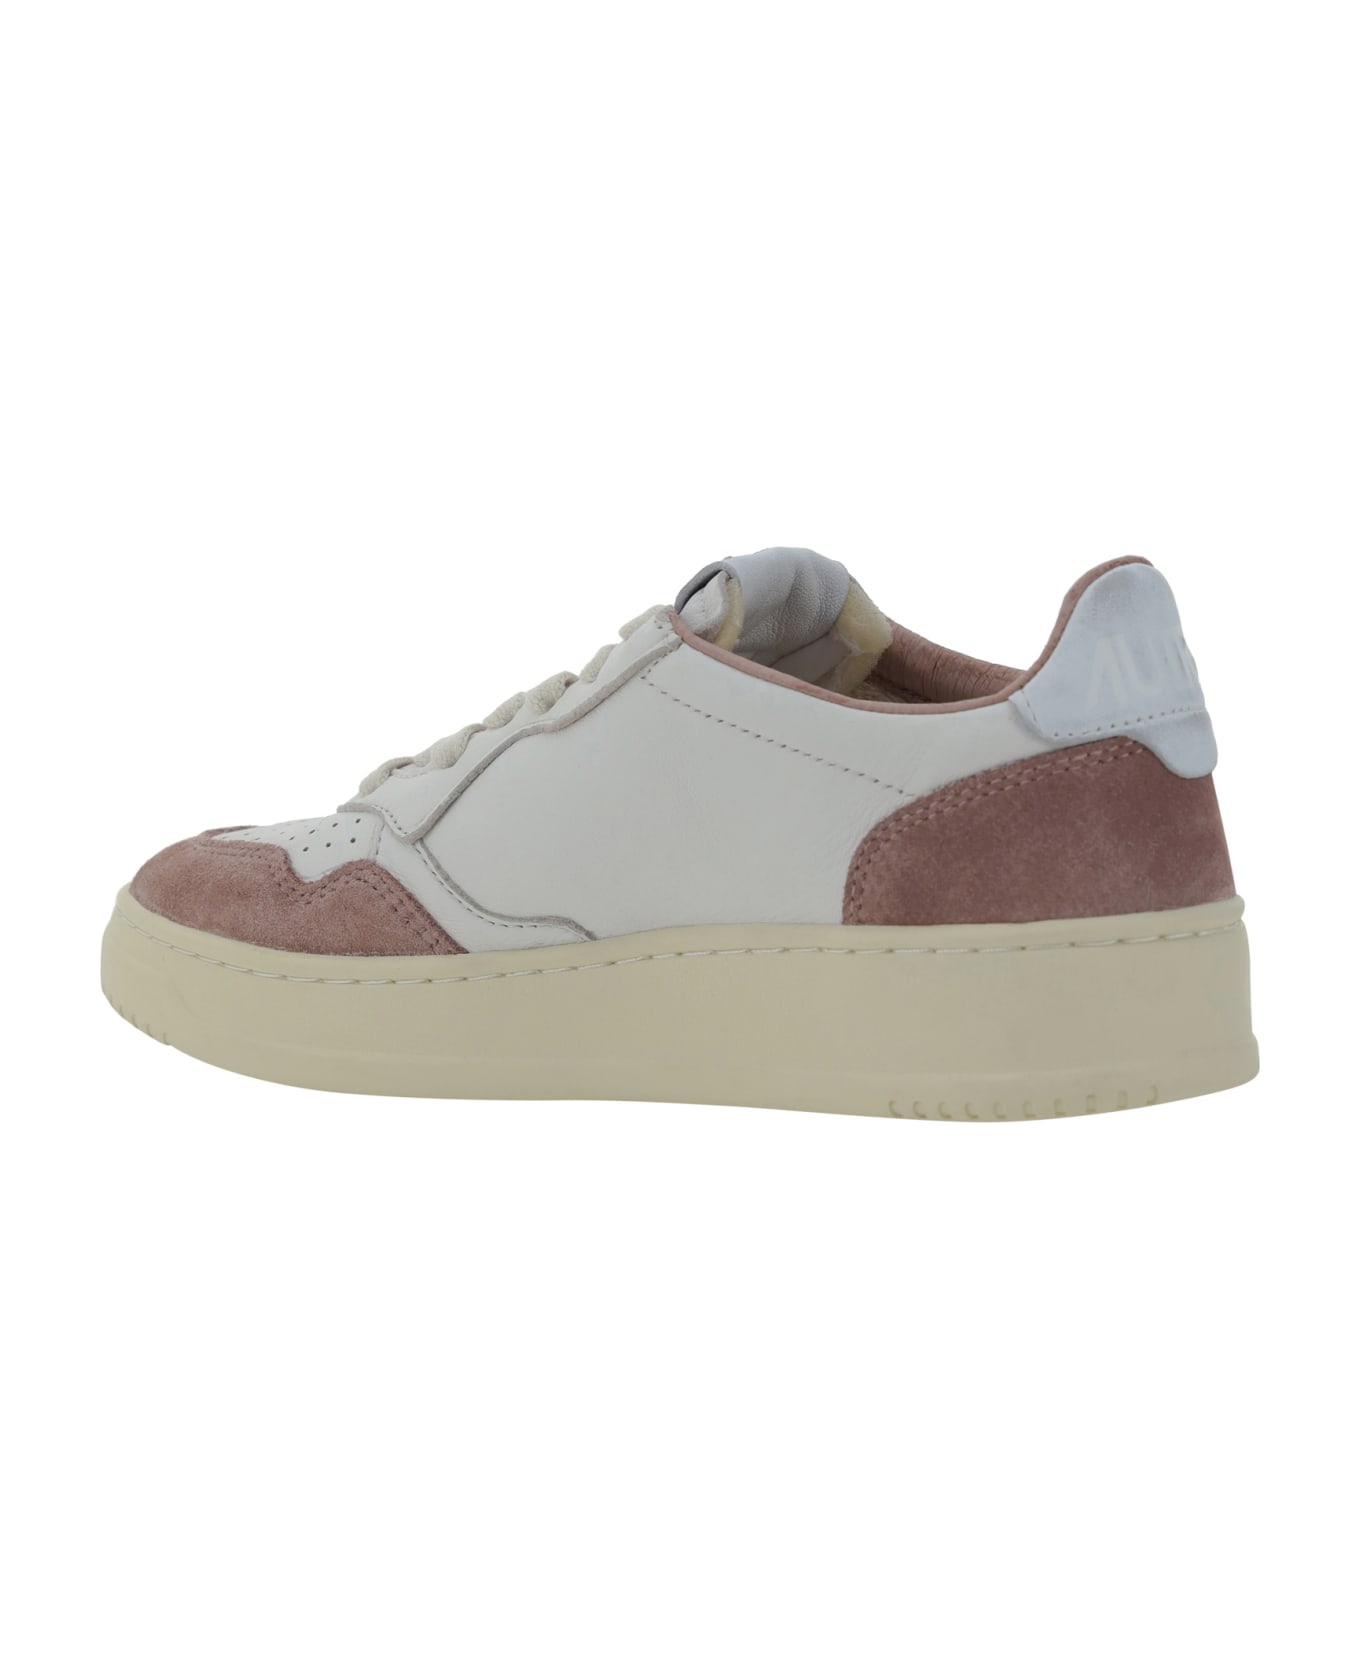 Autry Medalist Low Sneakers - Pink